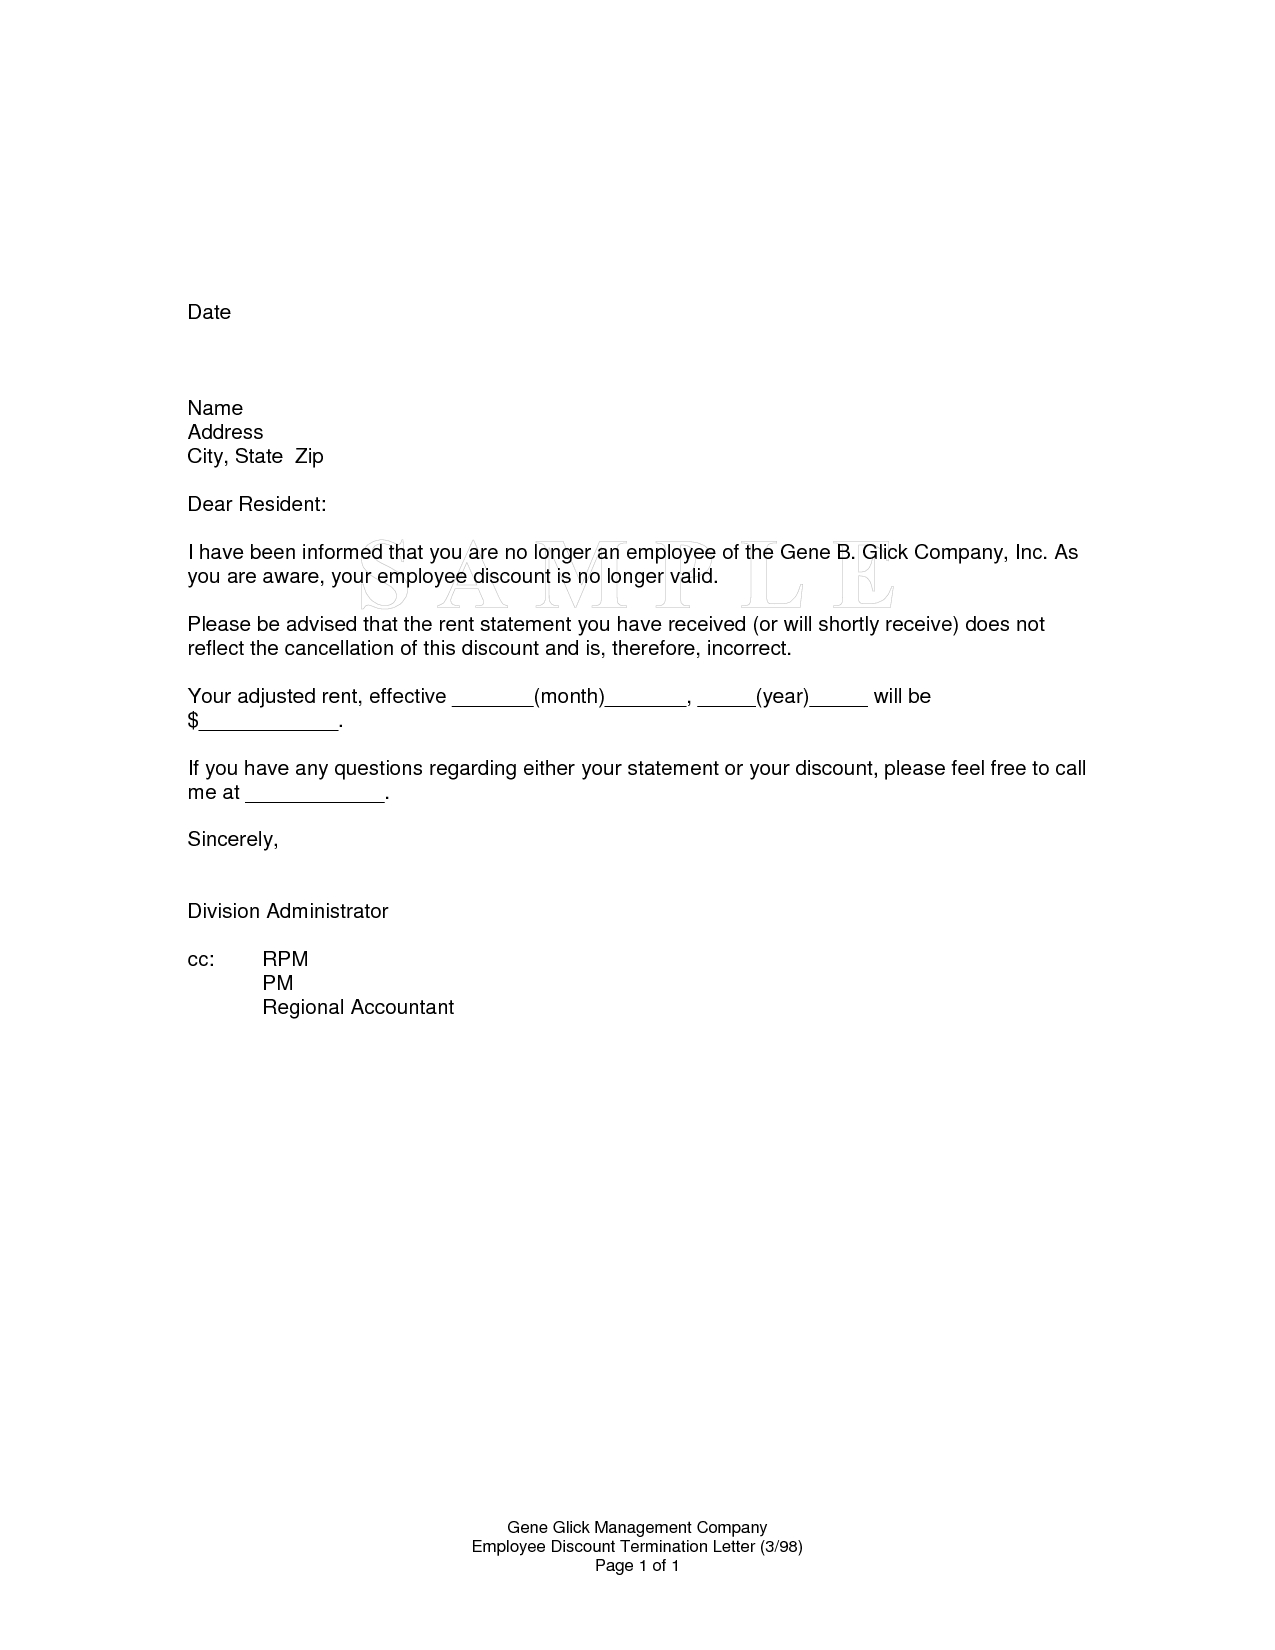 Fire Employee Letter Template - Sample Termination Letter without Cause